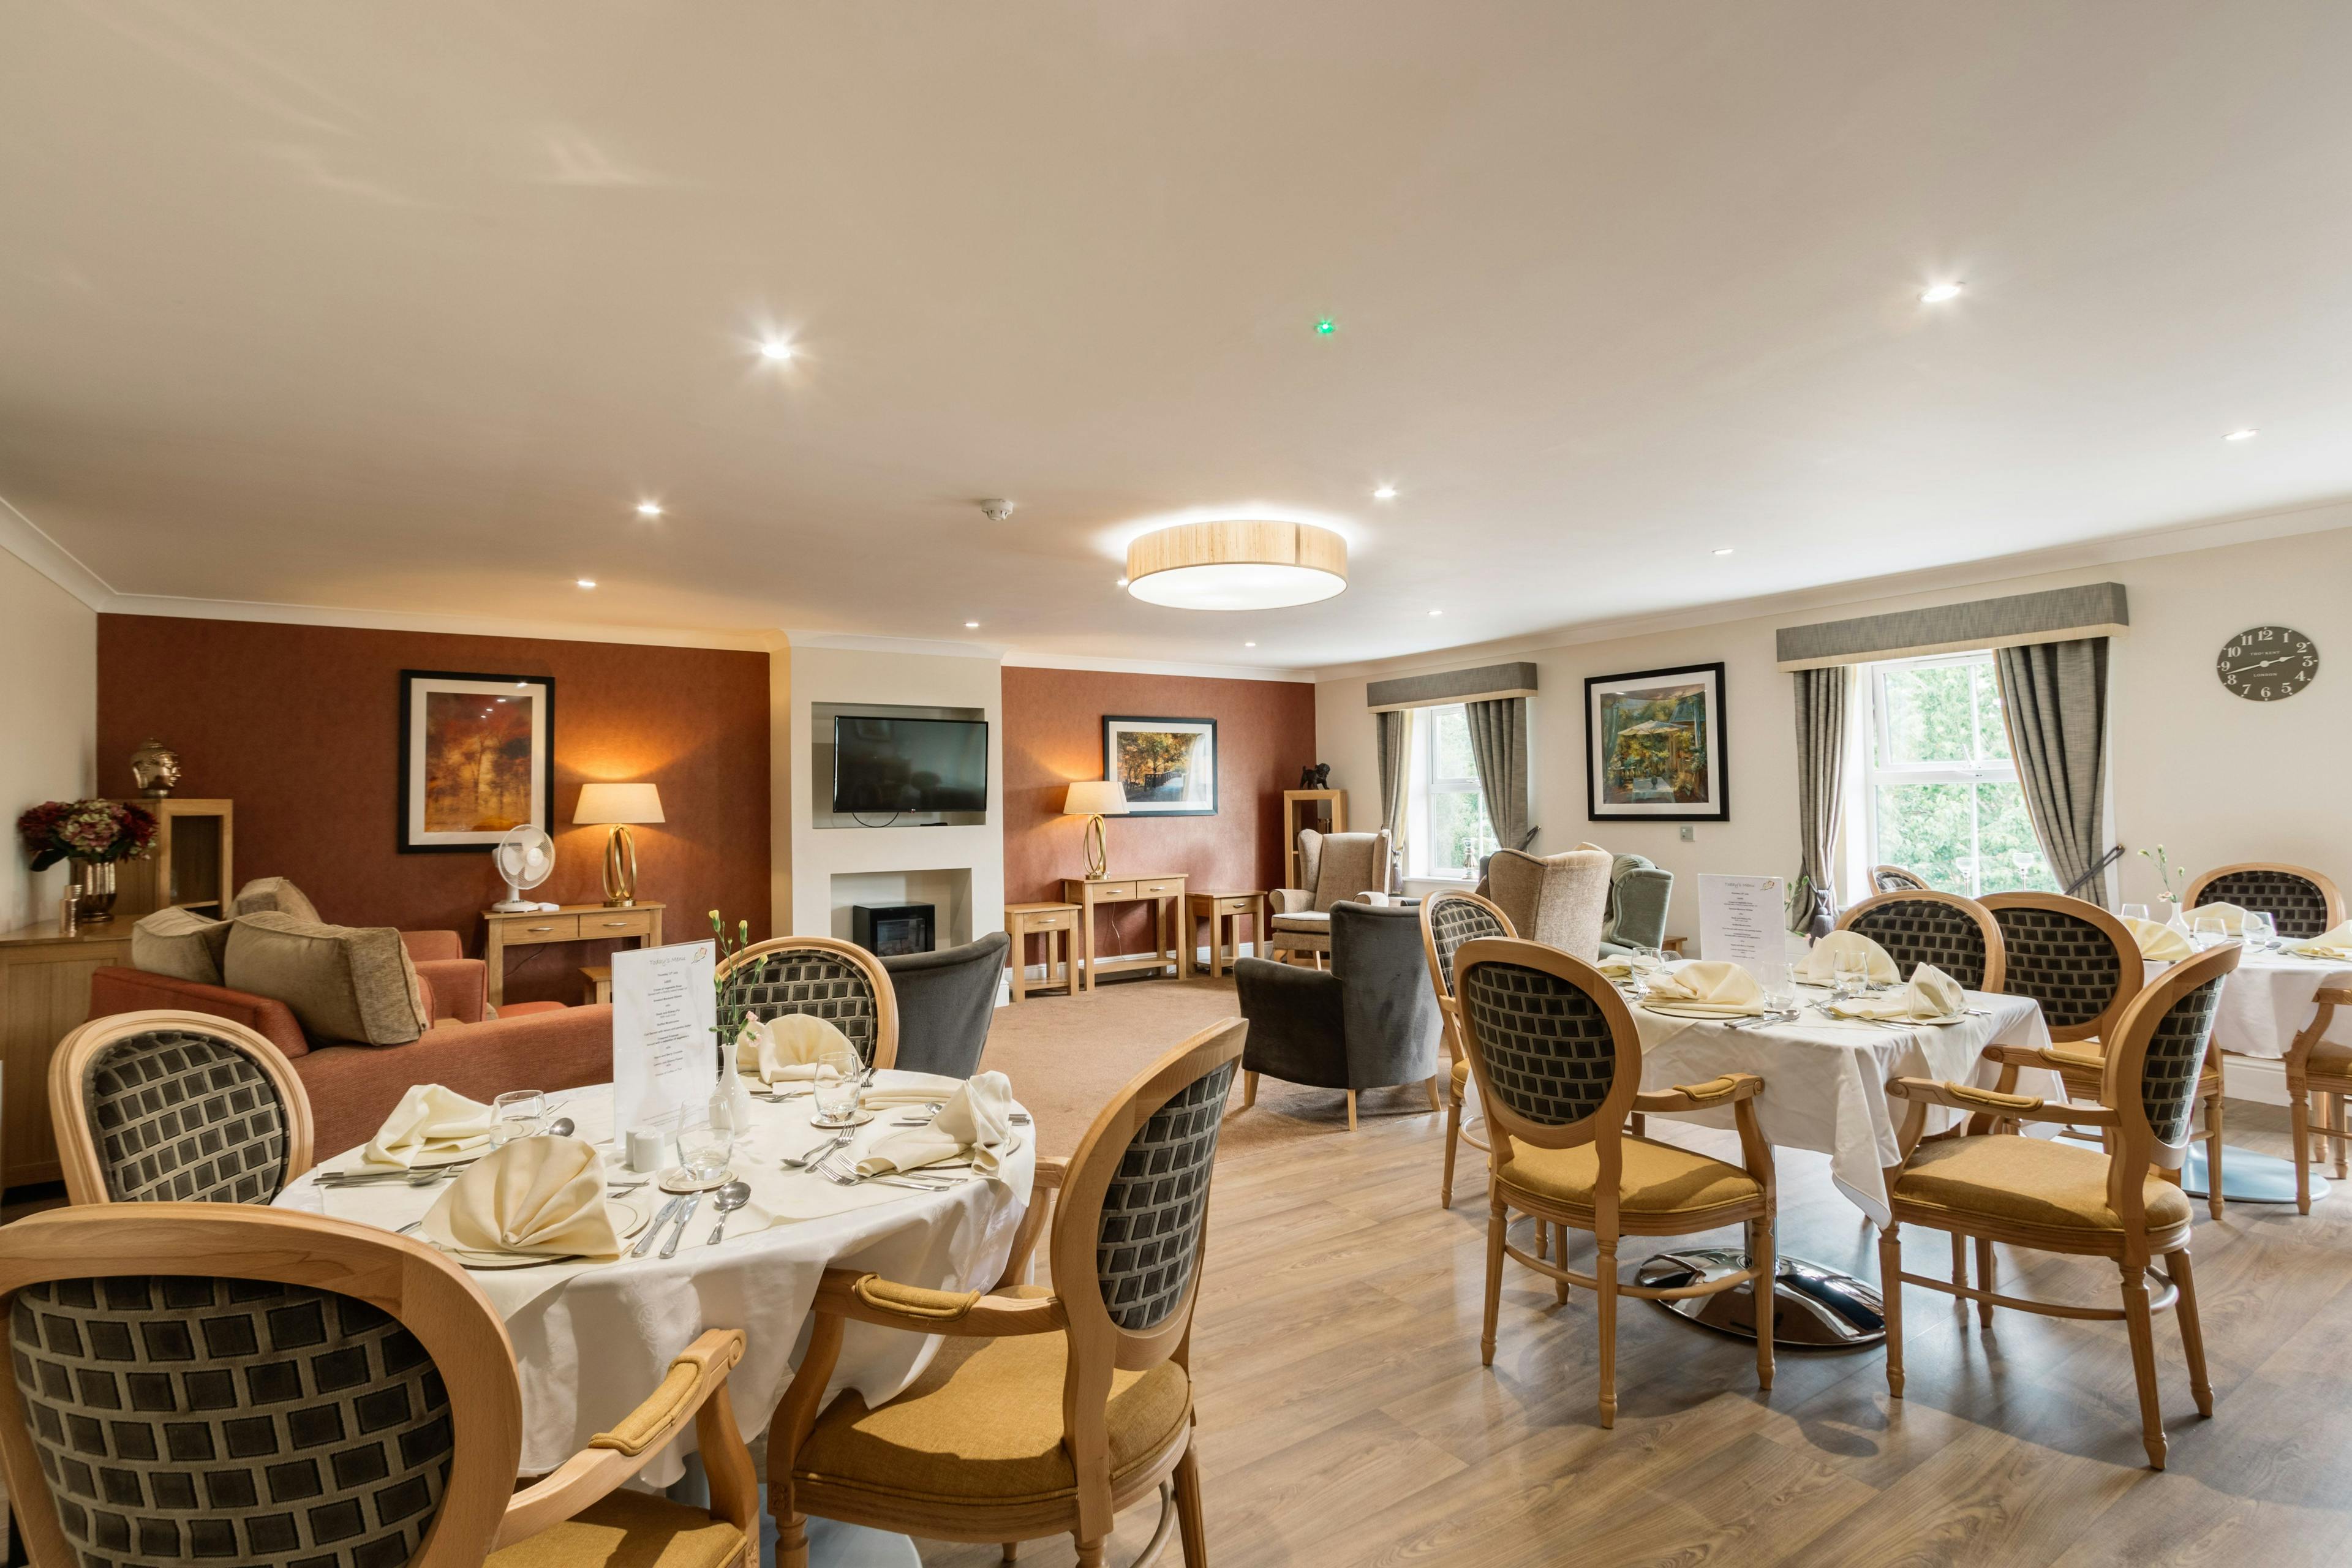 Dining Room at Stamford Bridge Beaumont Care Home in York, North Yorkshire